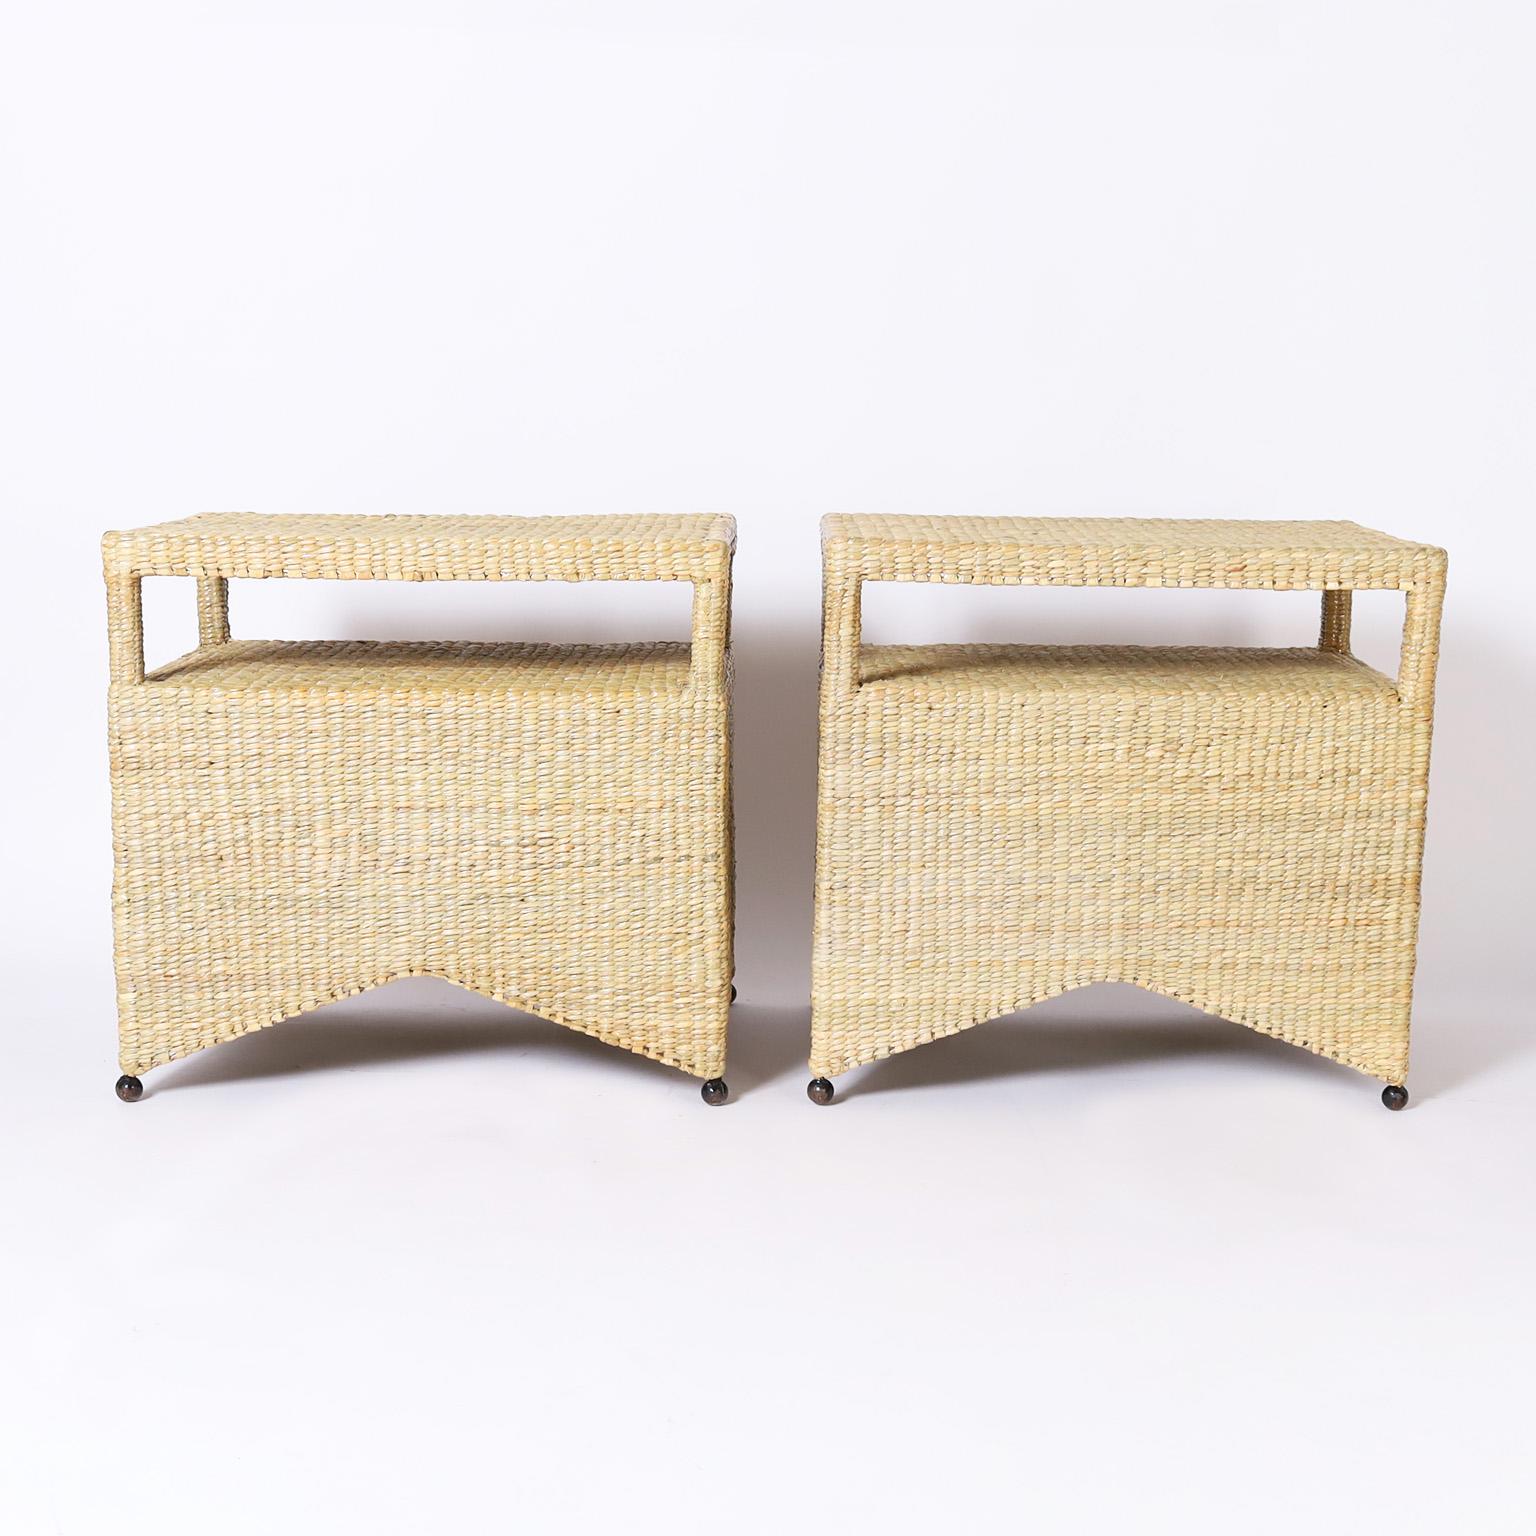 Pair of wicker stands or tables with two tiers crafted in reed expertly wrapped over a sturdy metal frame with ball feet, exclusively designed and offered by F.S. Henemader as part of the FS Flores Collection.